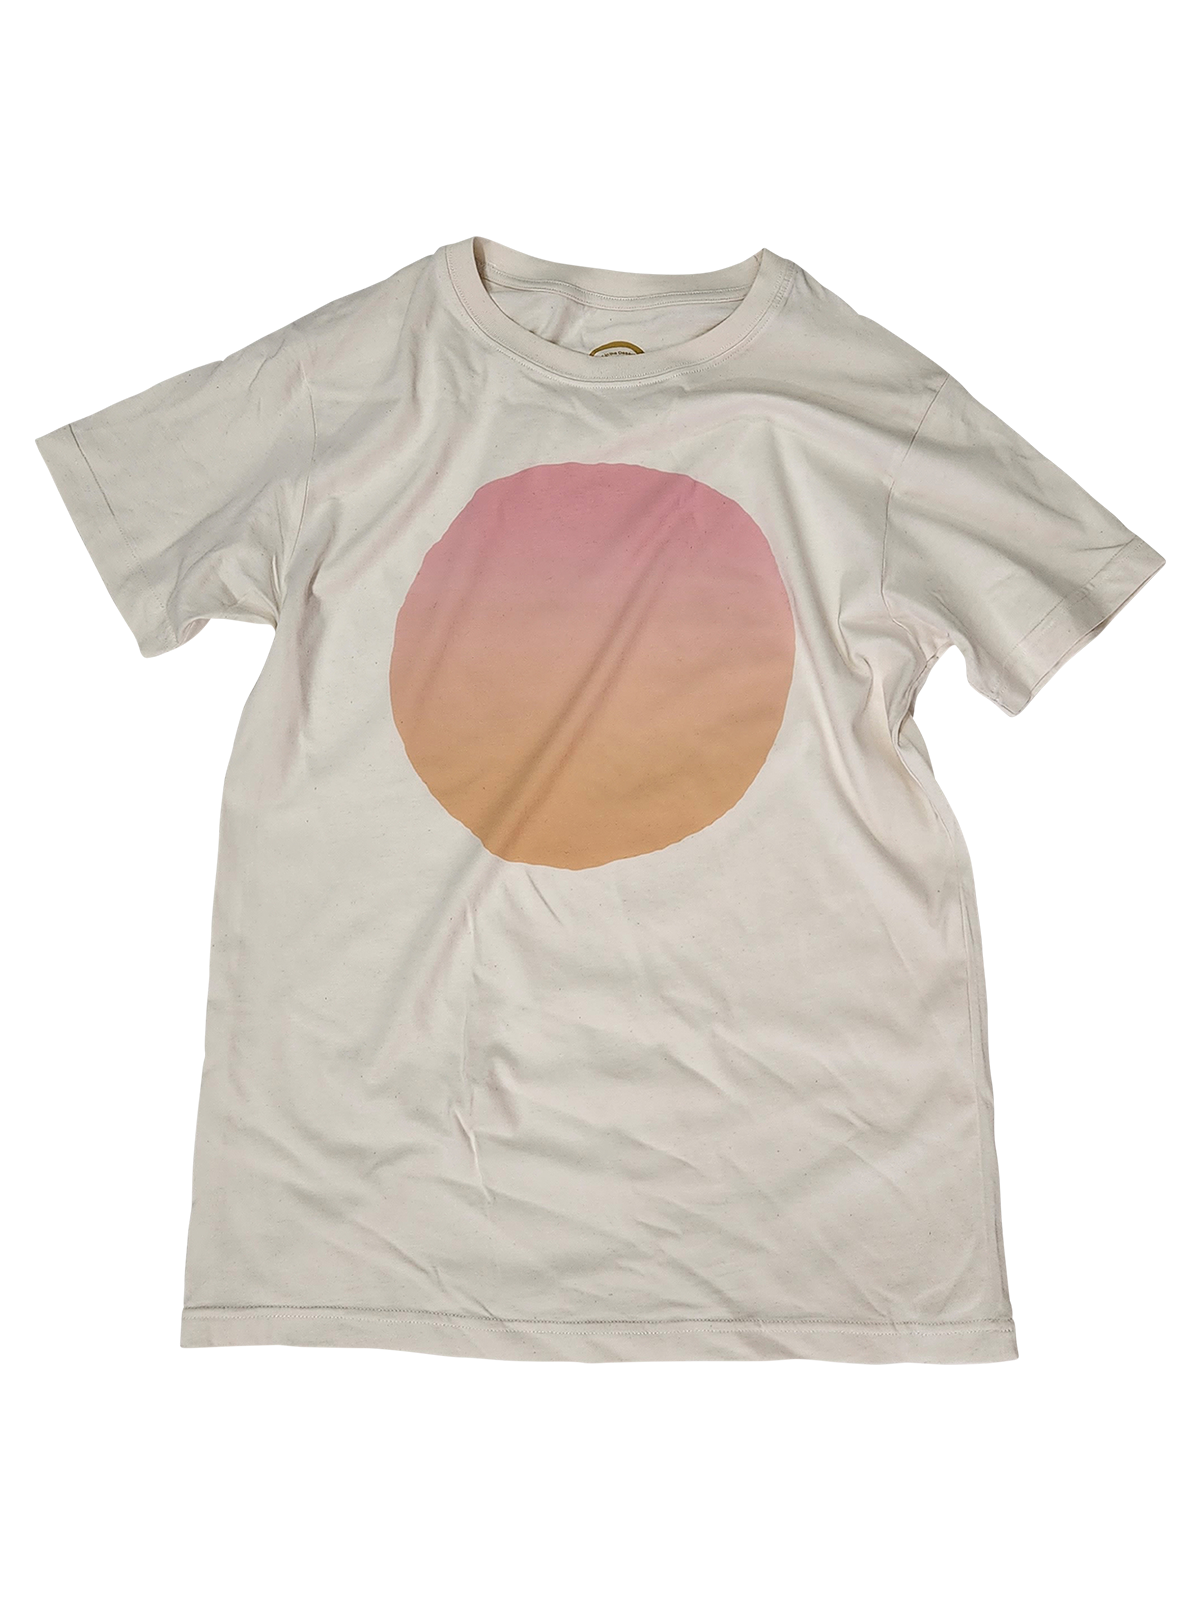 Circle Tee - Forever Summer